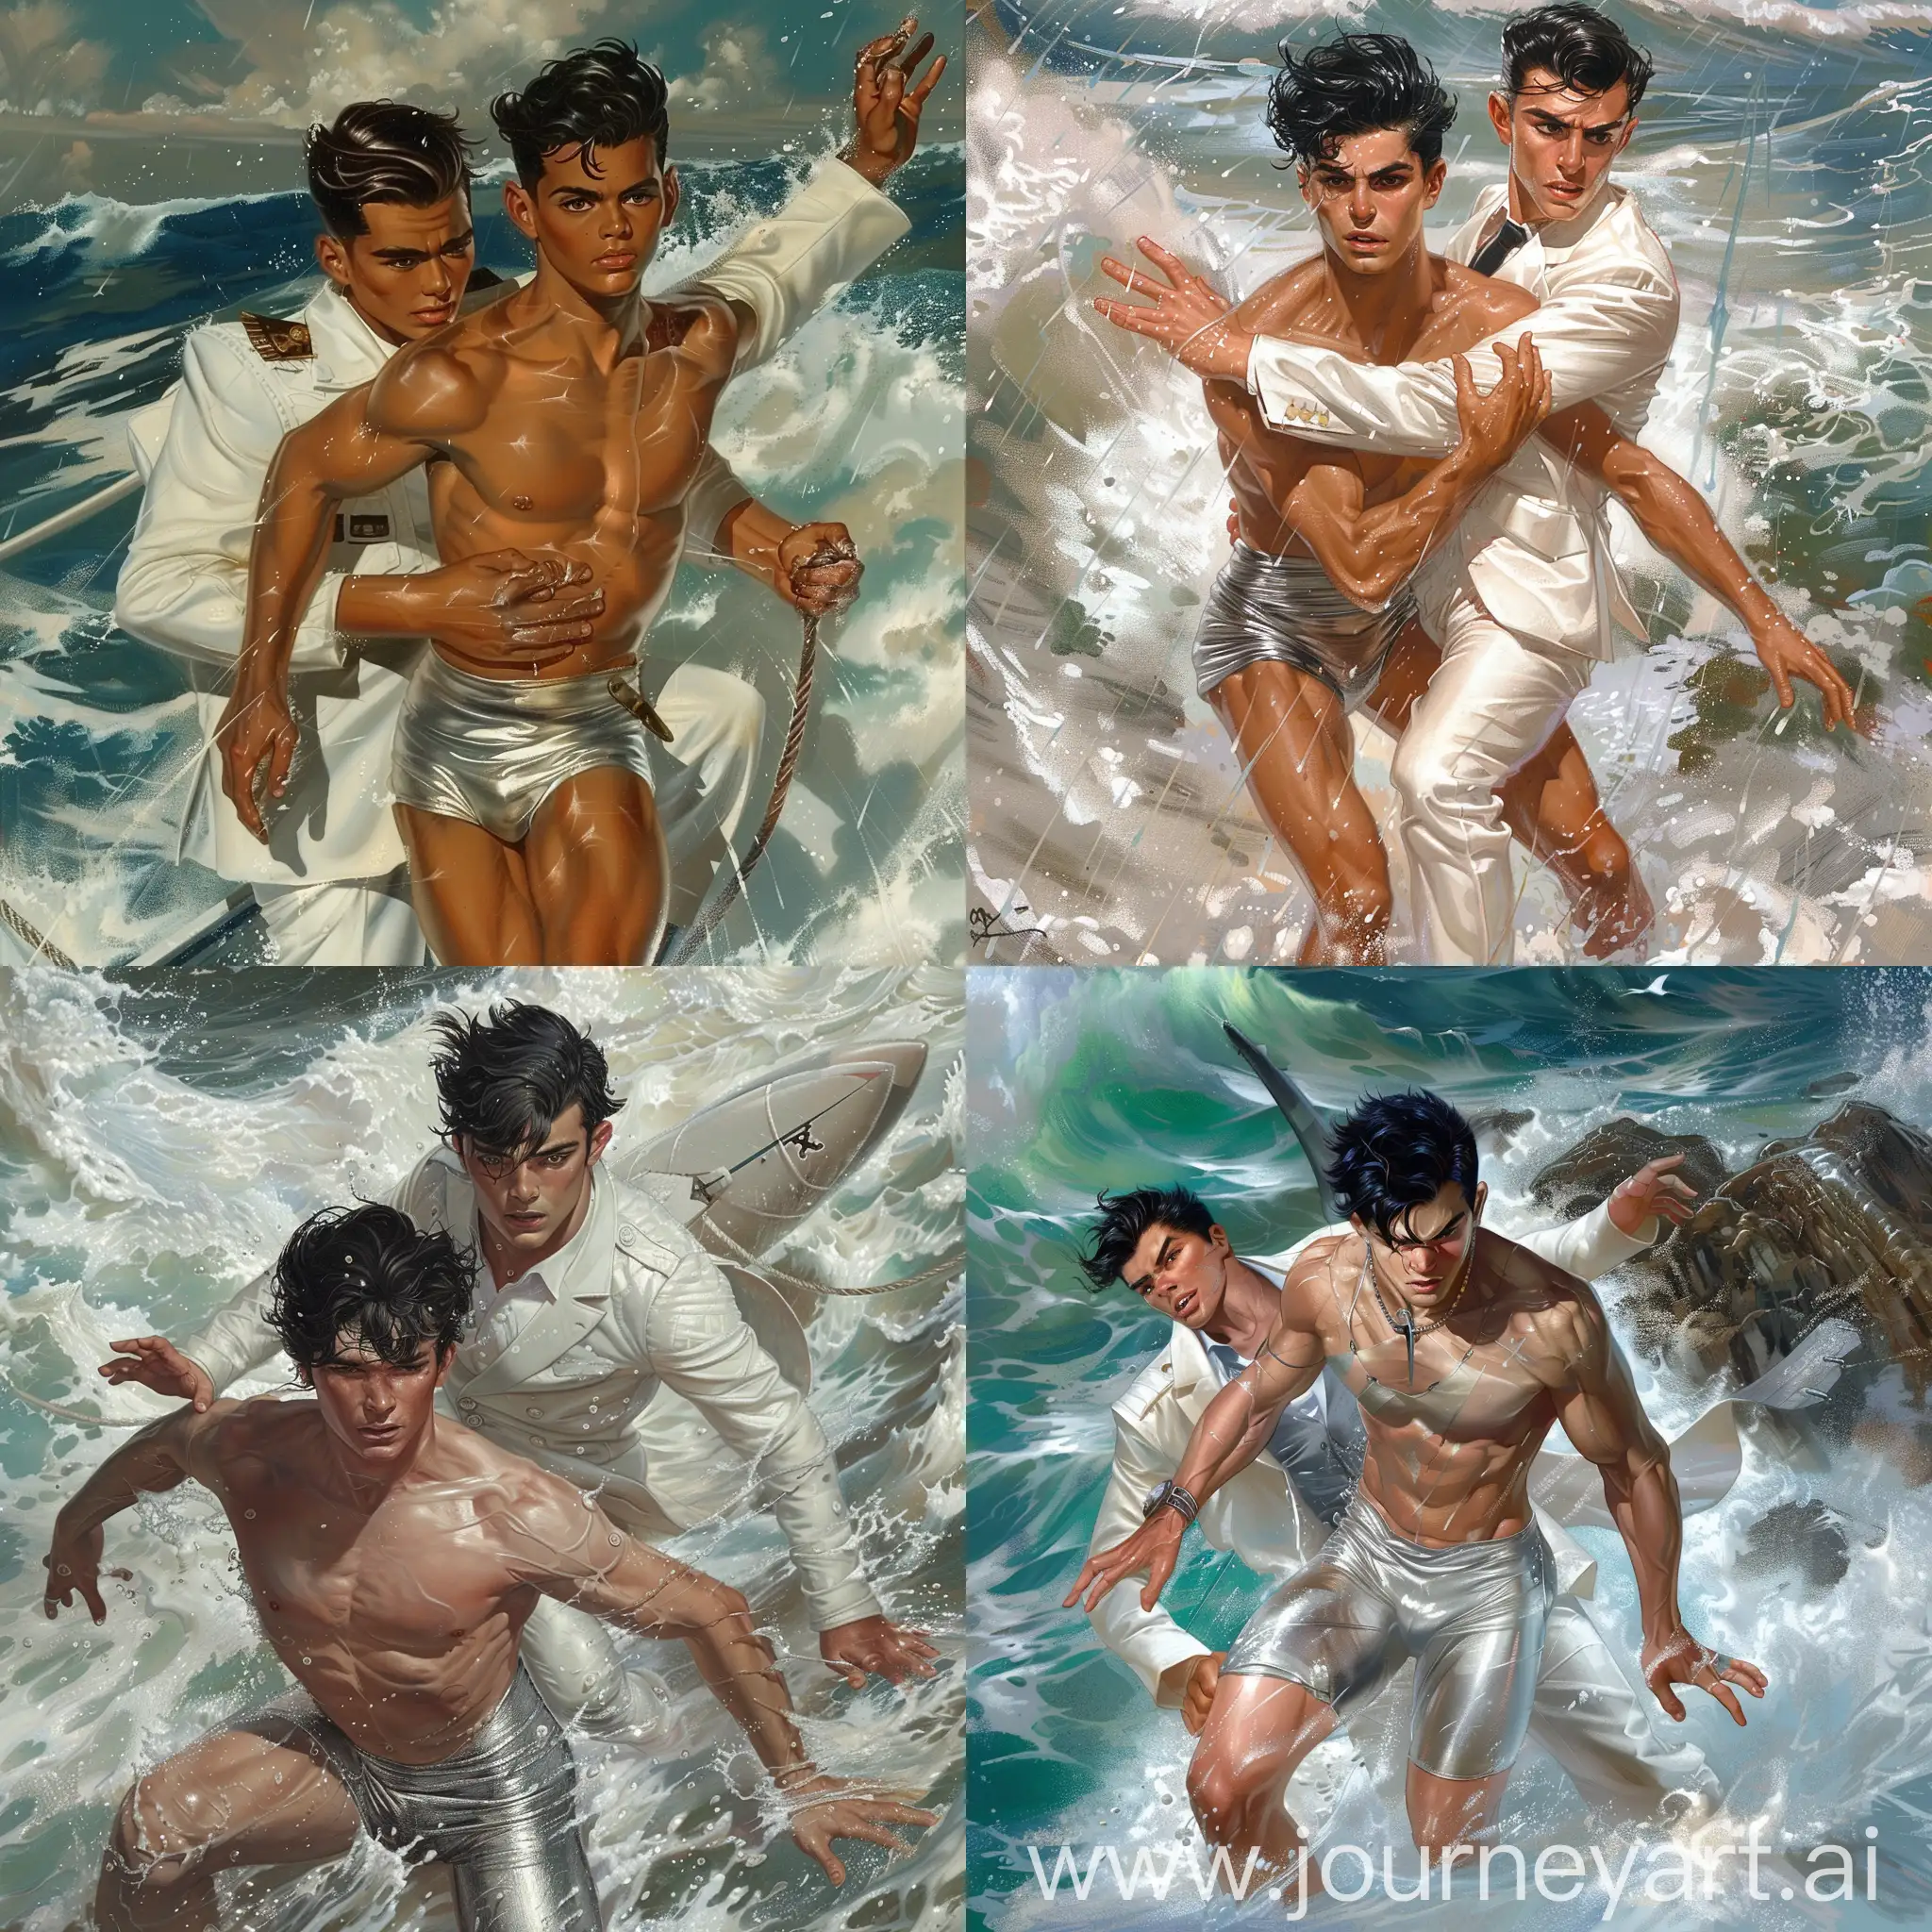 Dynamic-Duo-Two-Muscular-Men-in-Colorful-Swimsuits-Braving-the-Turbulent-Ocean